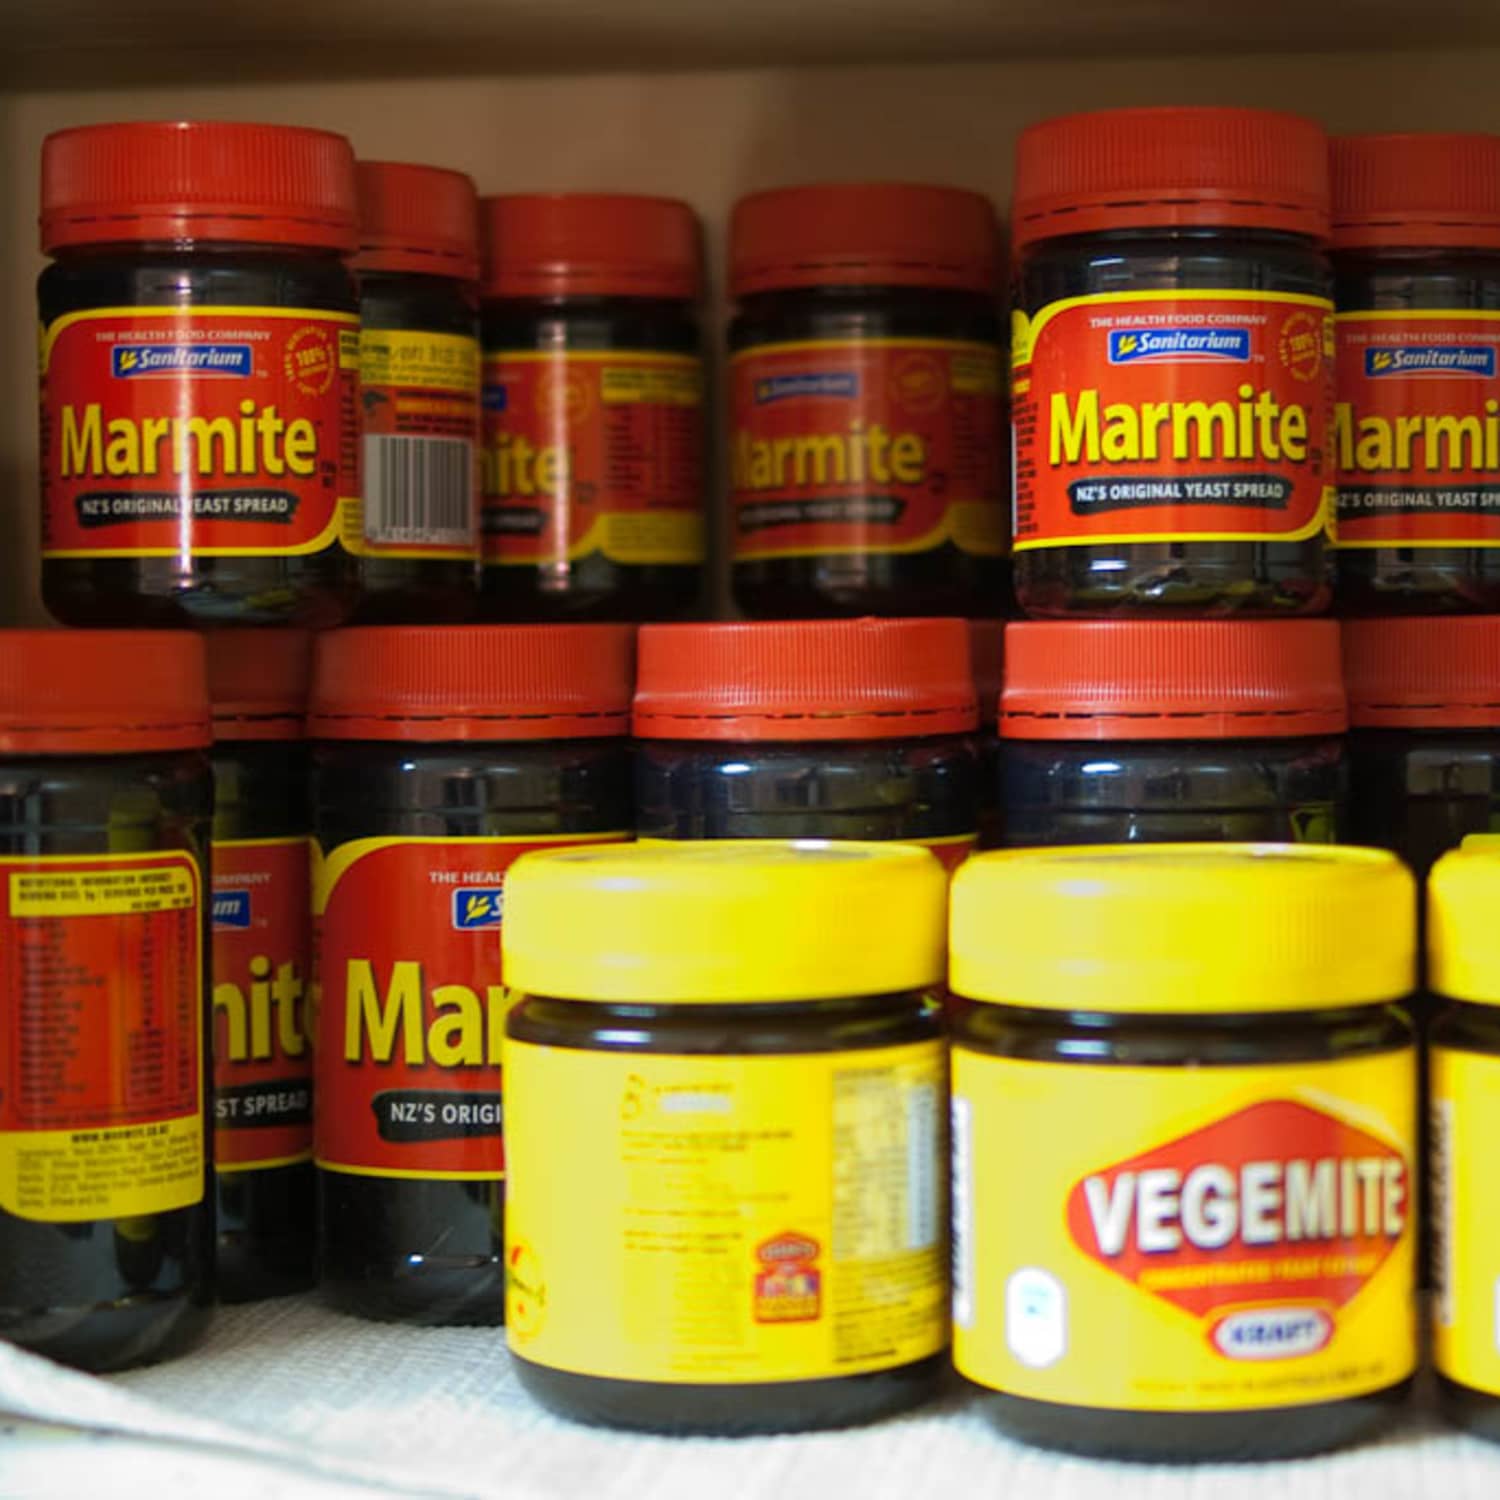 Is There A Real Difference Between Marmite And Vegemite?